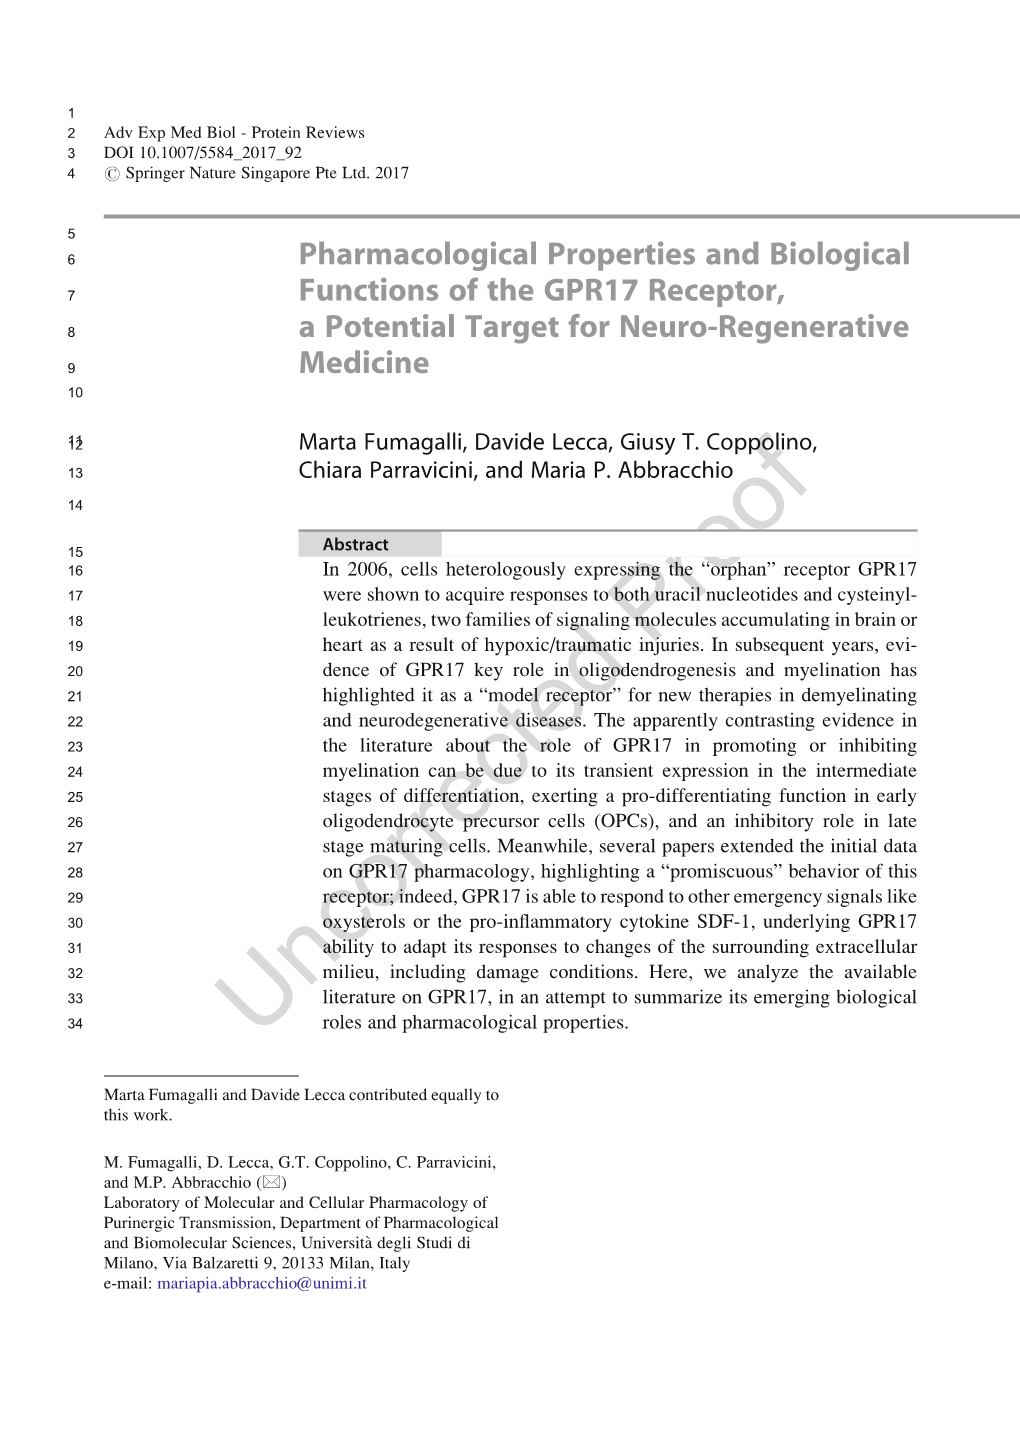 Pharmacological Properties and Biological Functions of the GPR17 Receptor, A